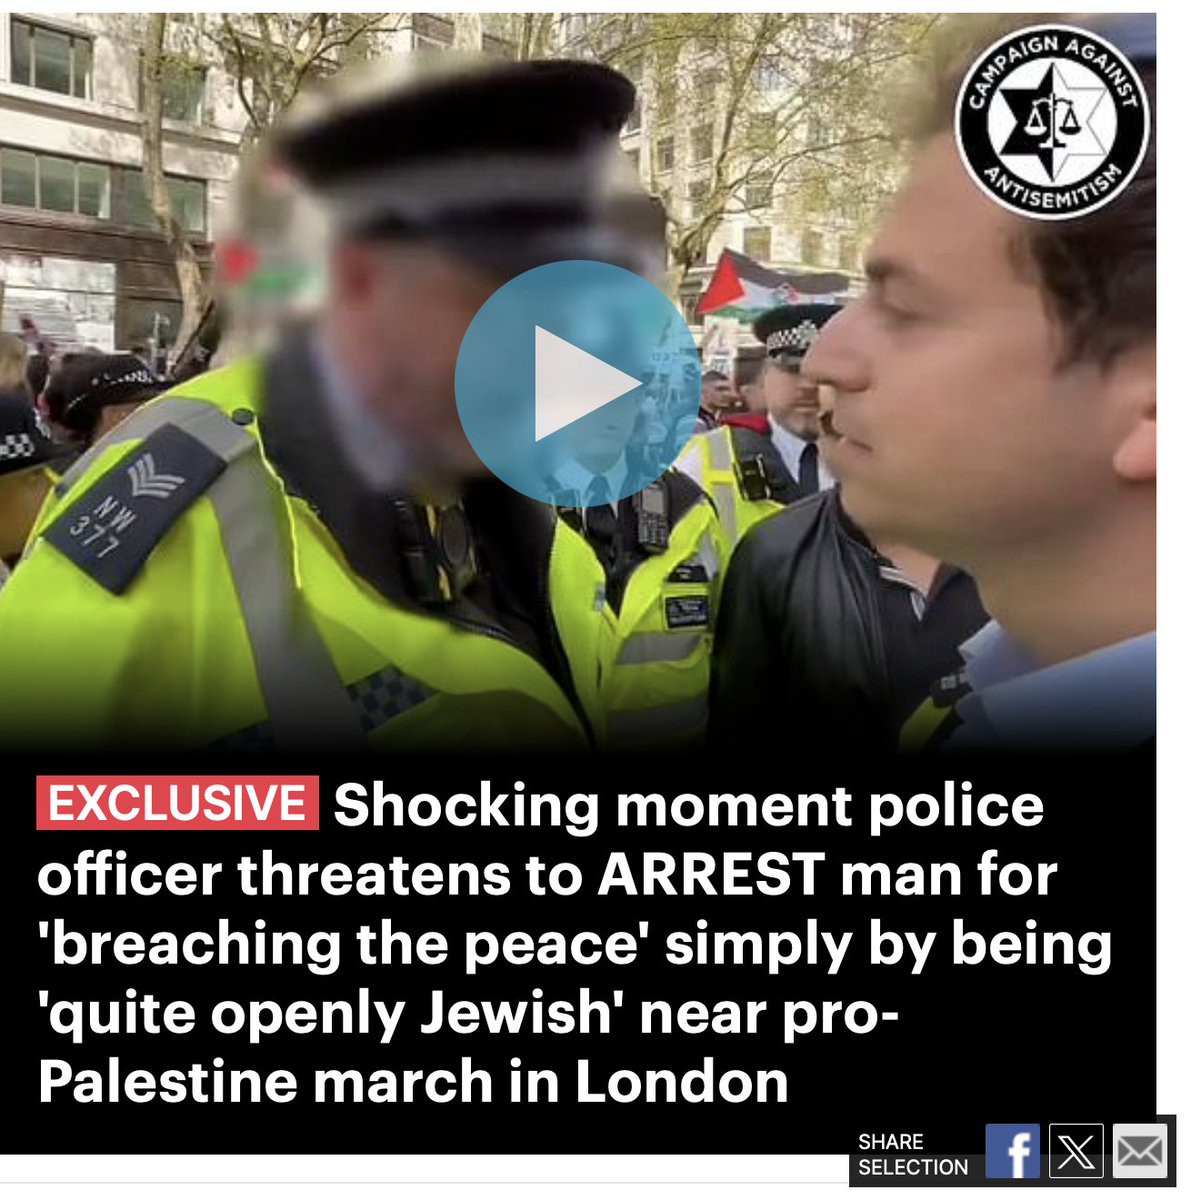 This Daily Mail story about a 'Jewish man trying to cross the road at a pro-Palestine march' fails to mention that the man is none other than 'Campaign Against Antisemitism' director, Gideon Falter, going about his day job of trying to stir up racial division at a Palestine rally